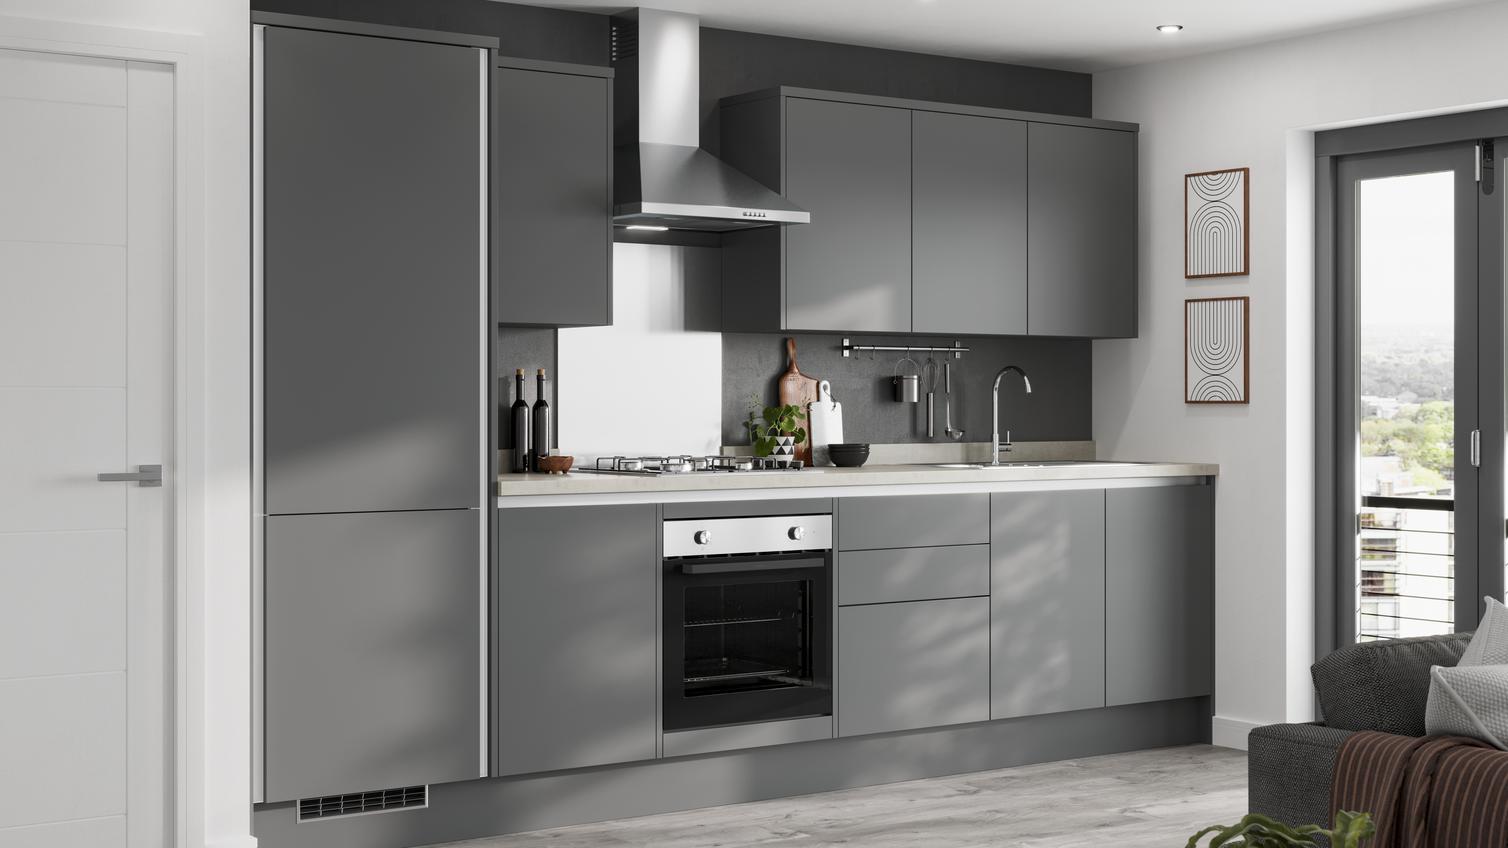 A contemporary grey handleless kitchen in a single wall layout with silver profiles, slab cupboards, and pale wood worktops.